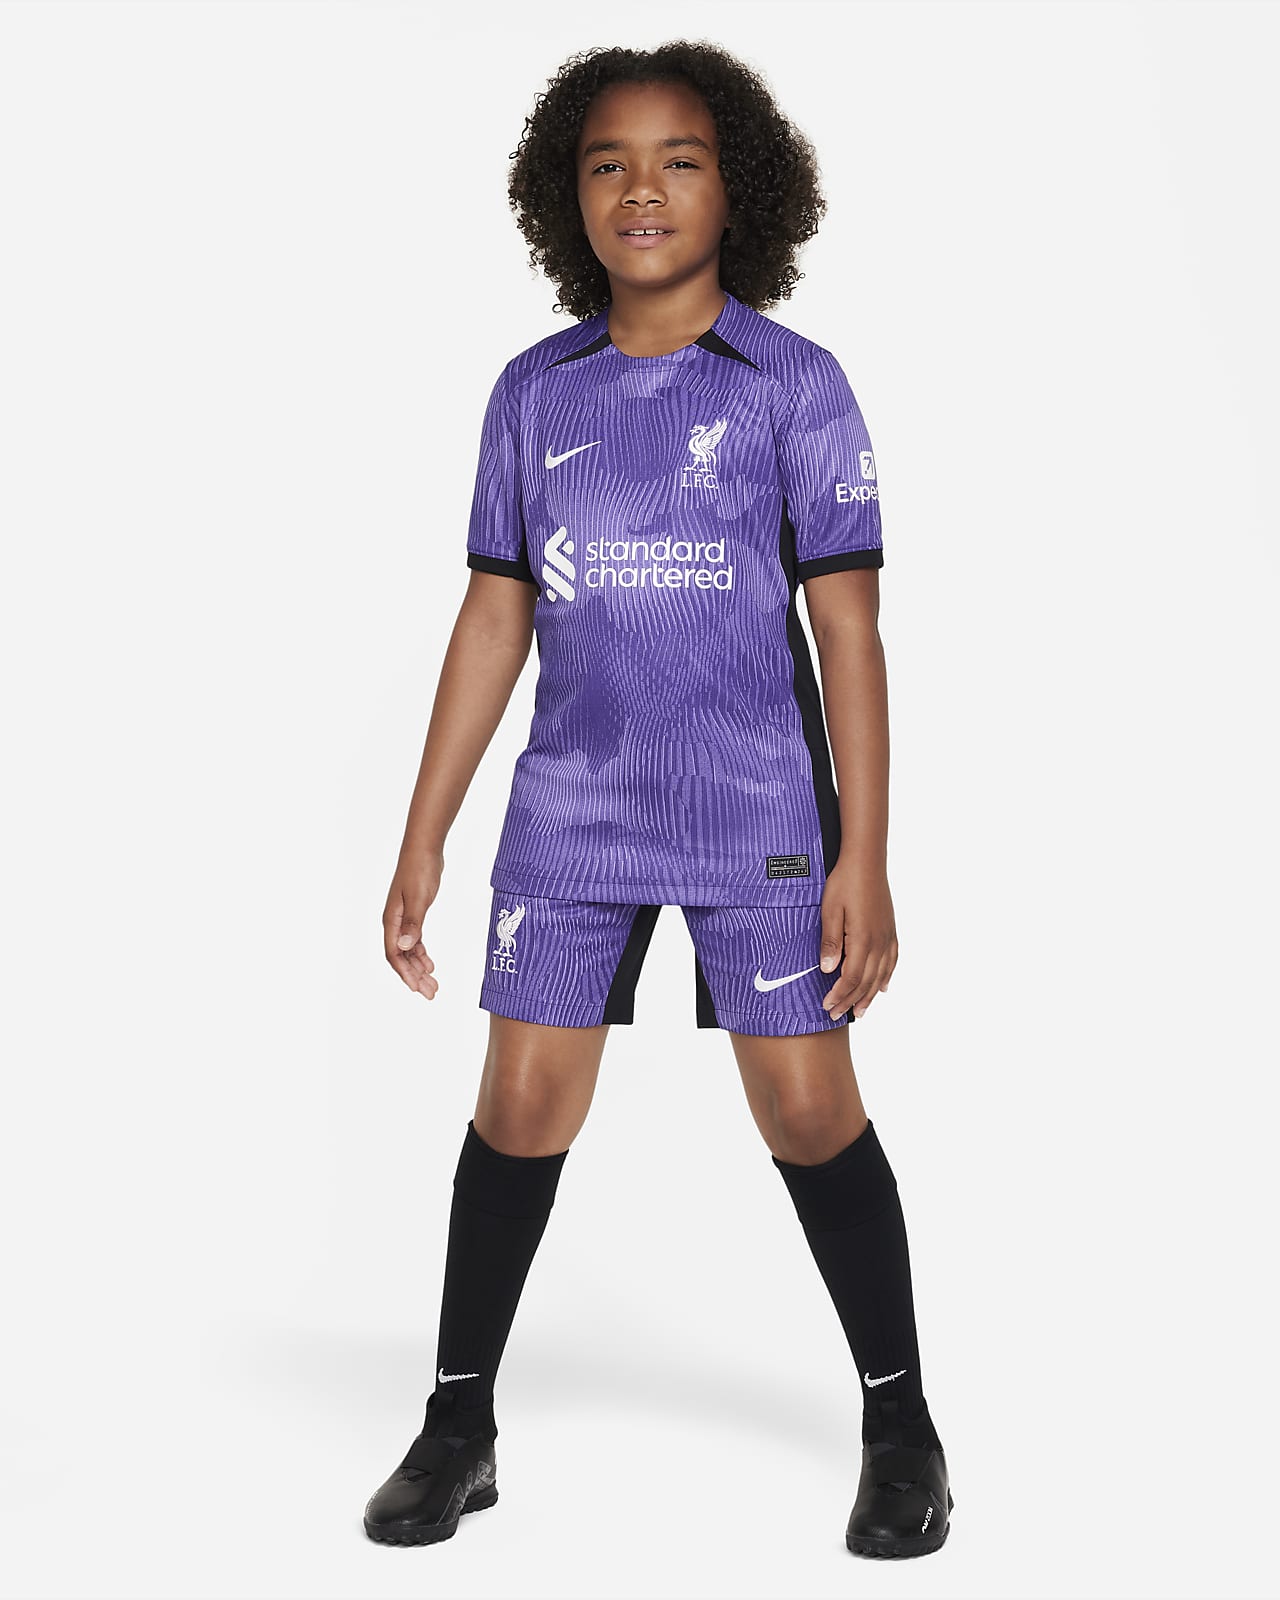 Liverpool FC - An old third kit!